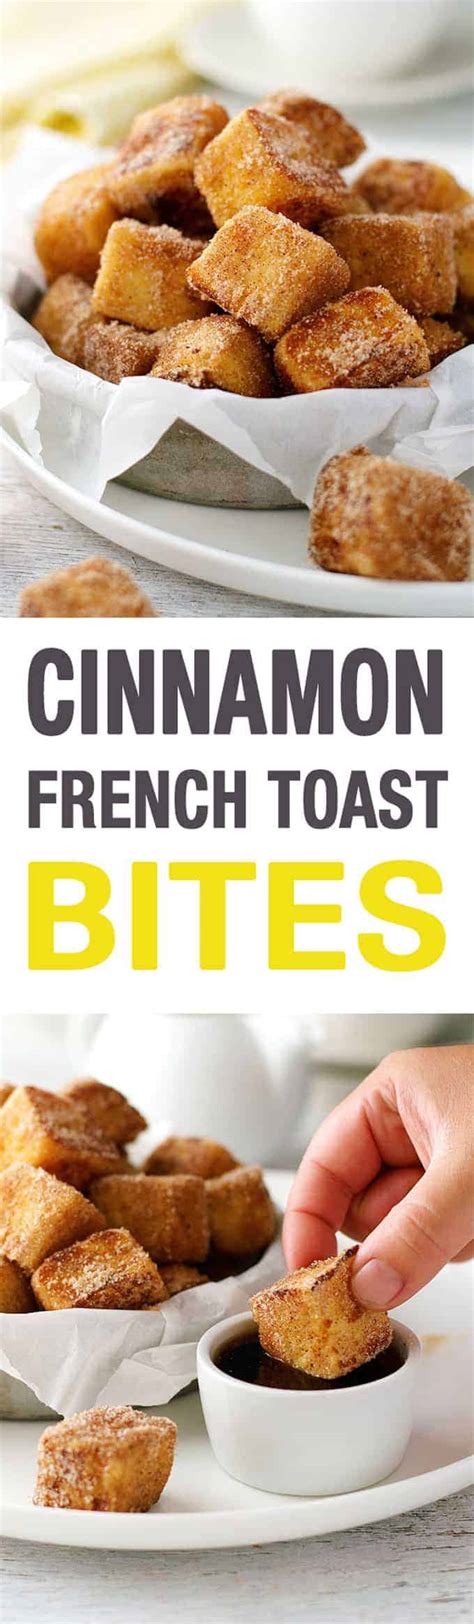 French toast bites are so incredibly easy to make and come together in minutes. Cinnamon French Toast Bites | RecipeTin Eats